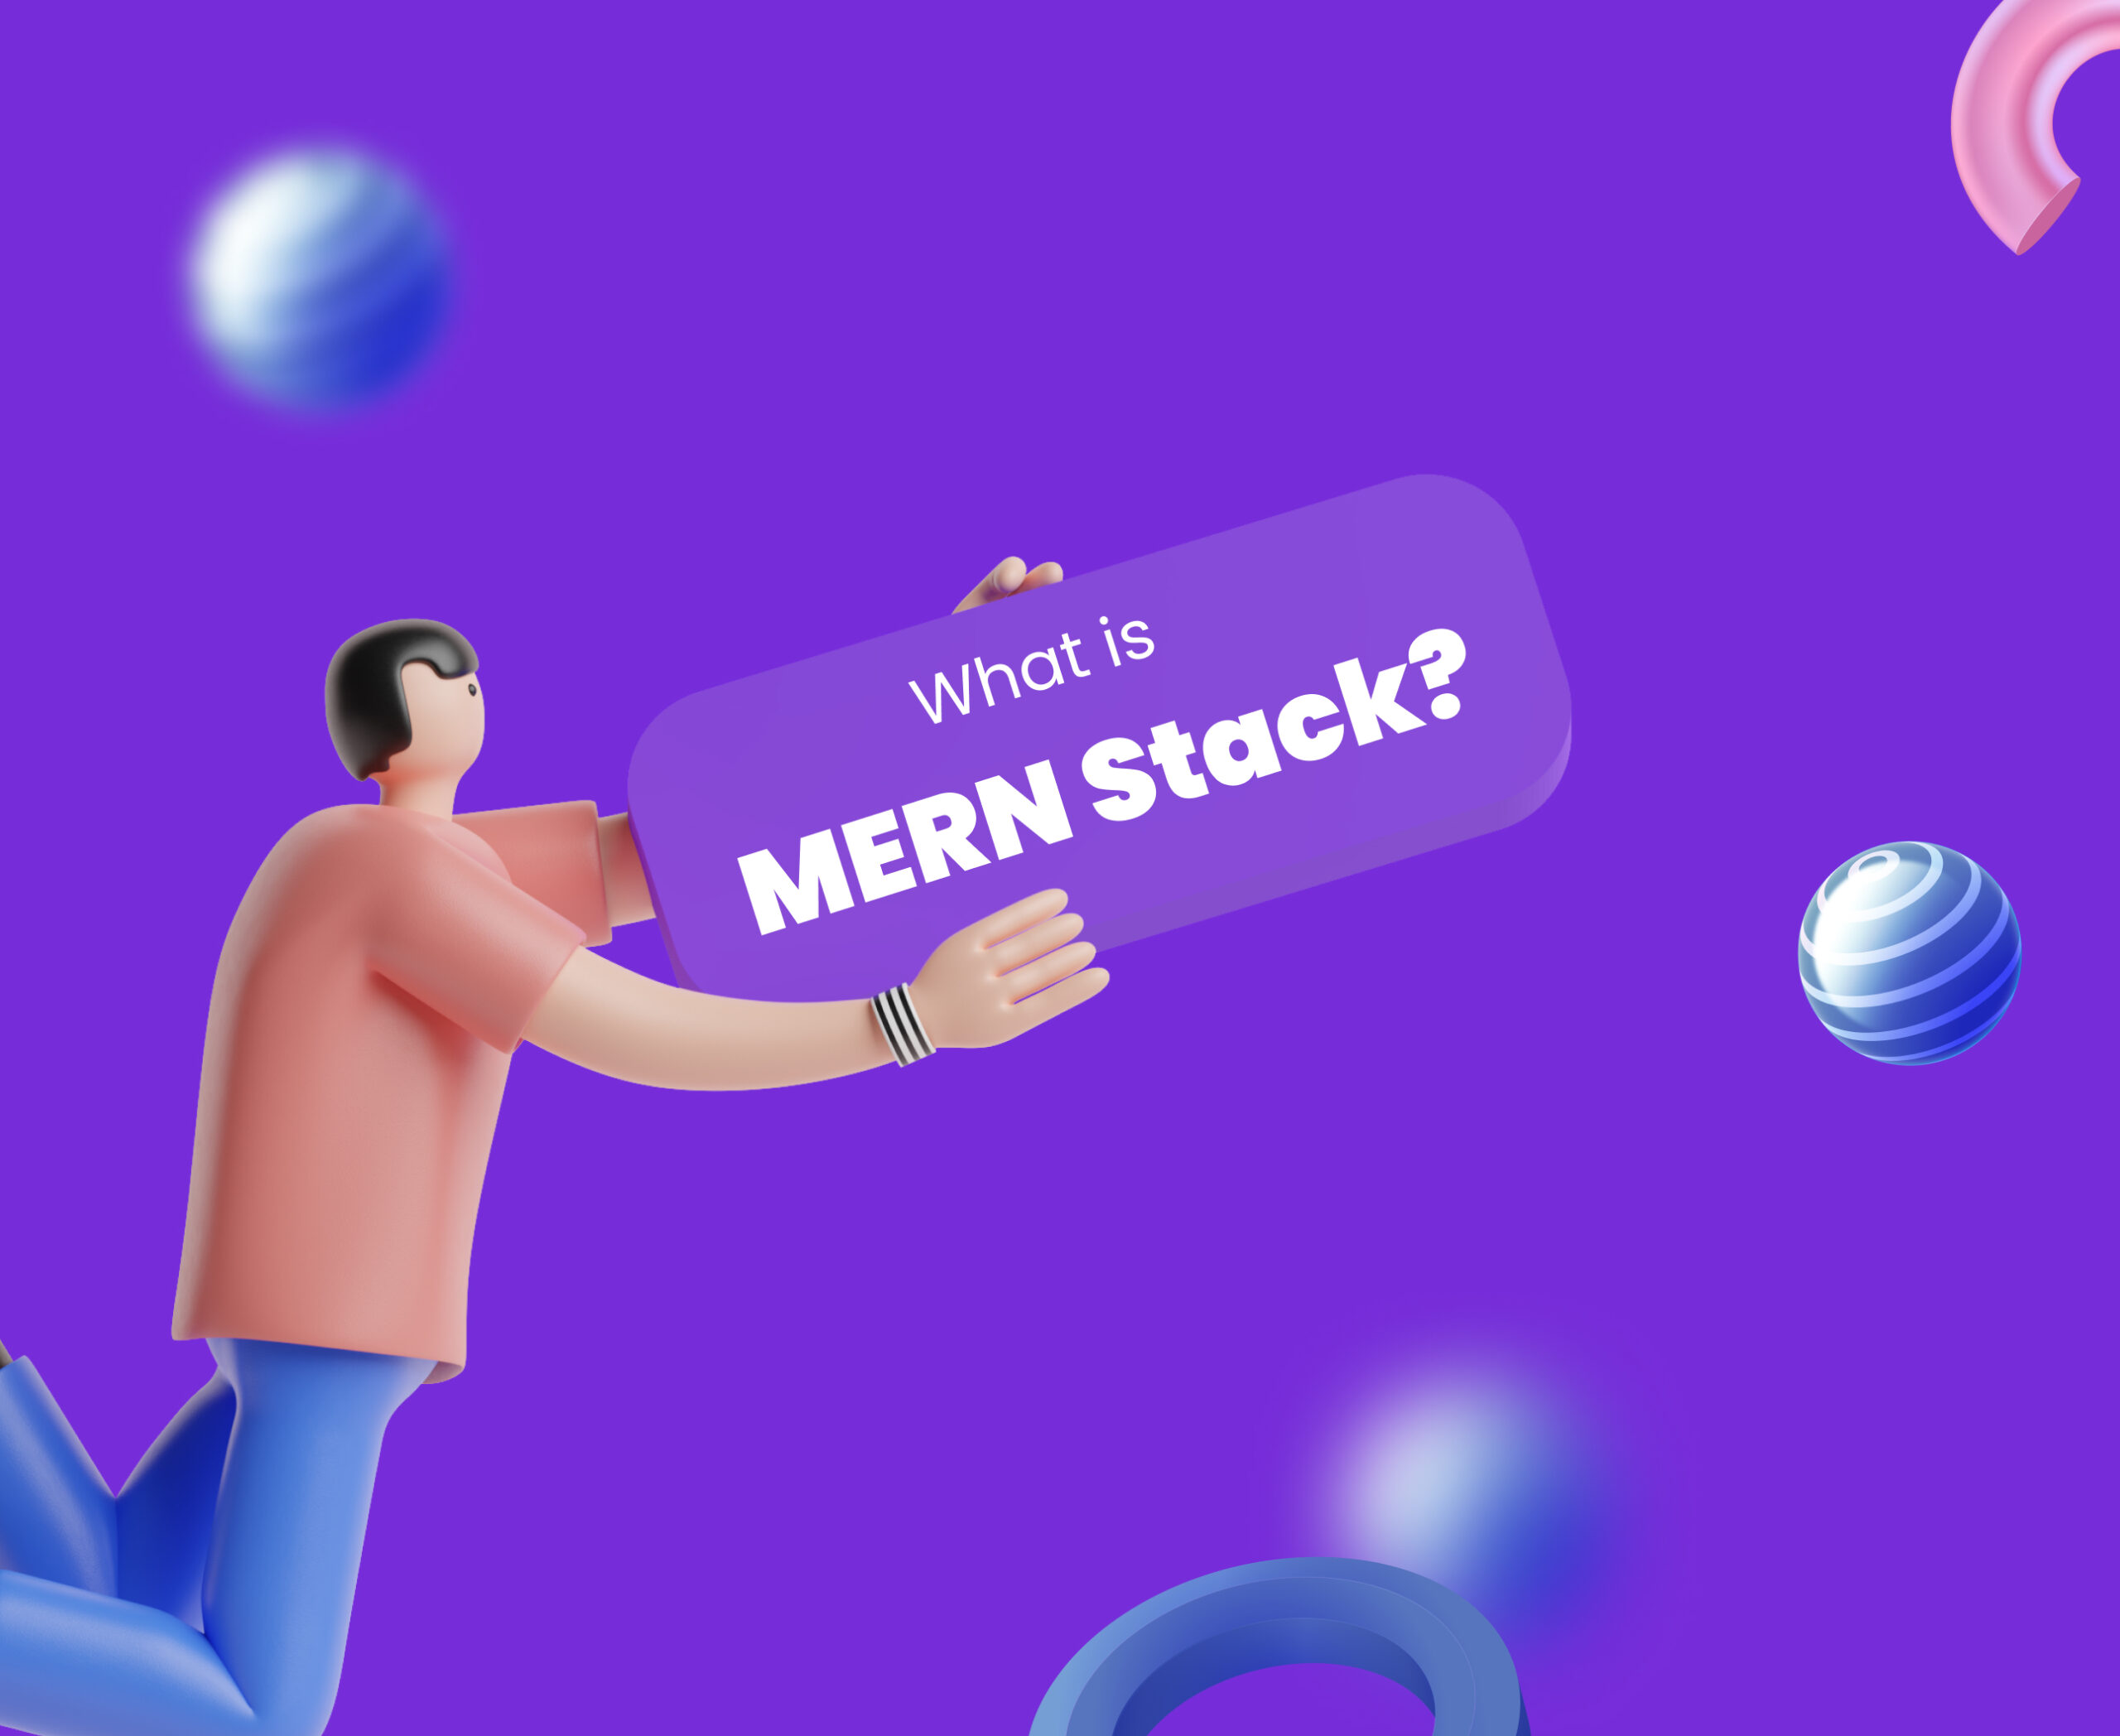 What is MERN Stack